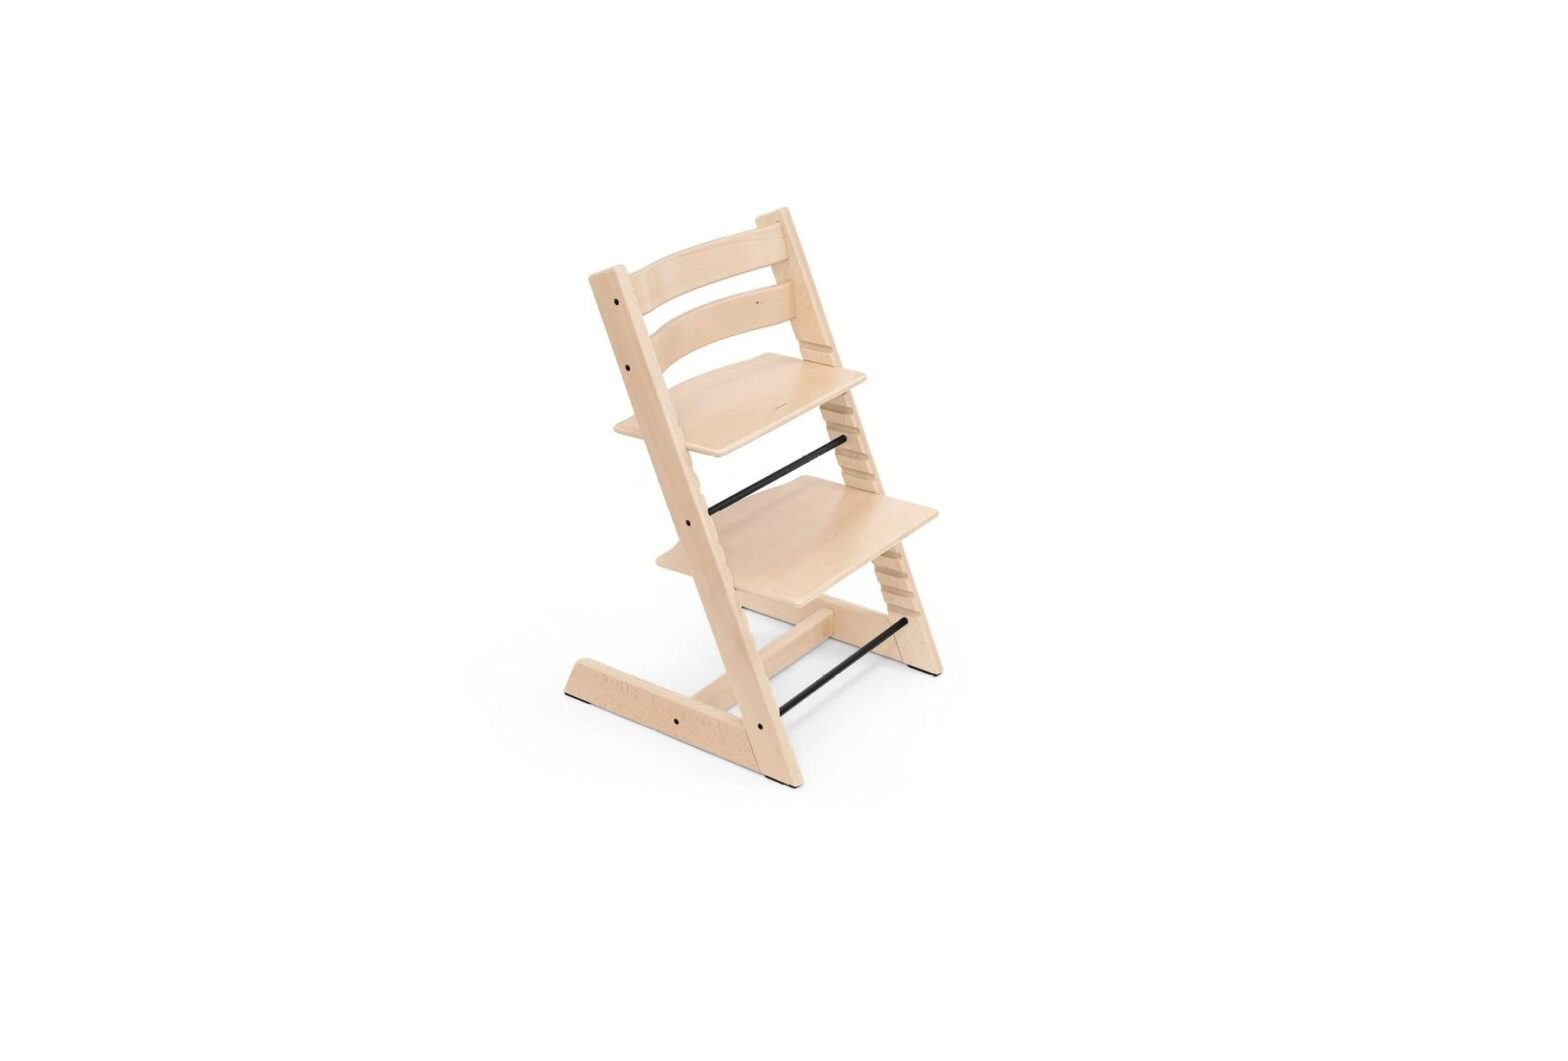 STOKKE Tripp Trapp Stoel User Guide - Featured image